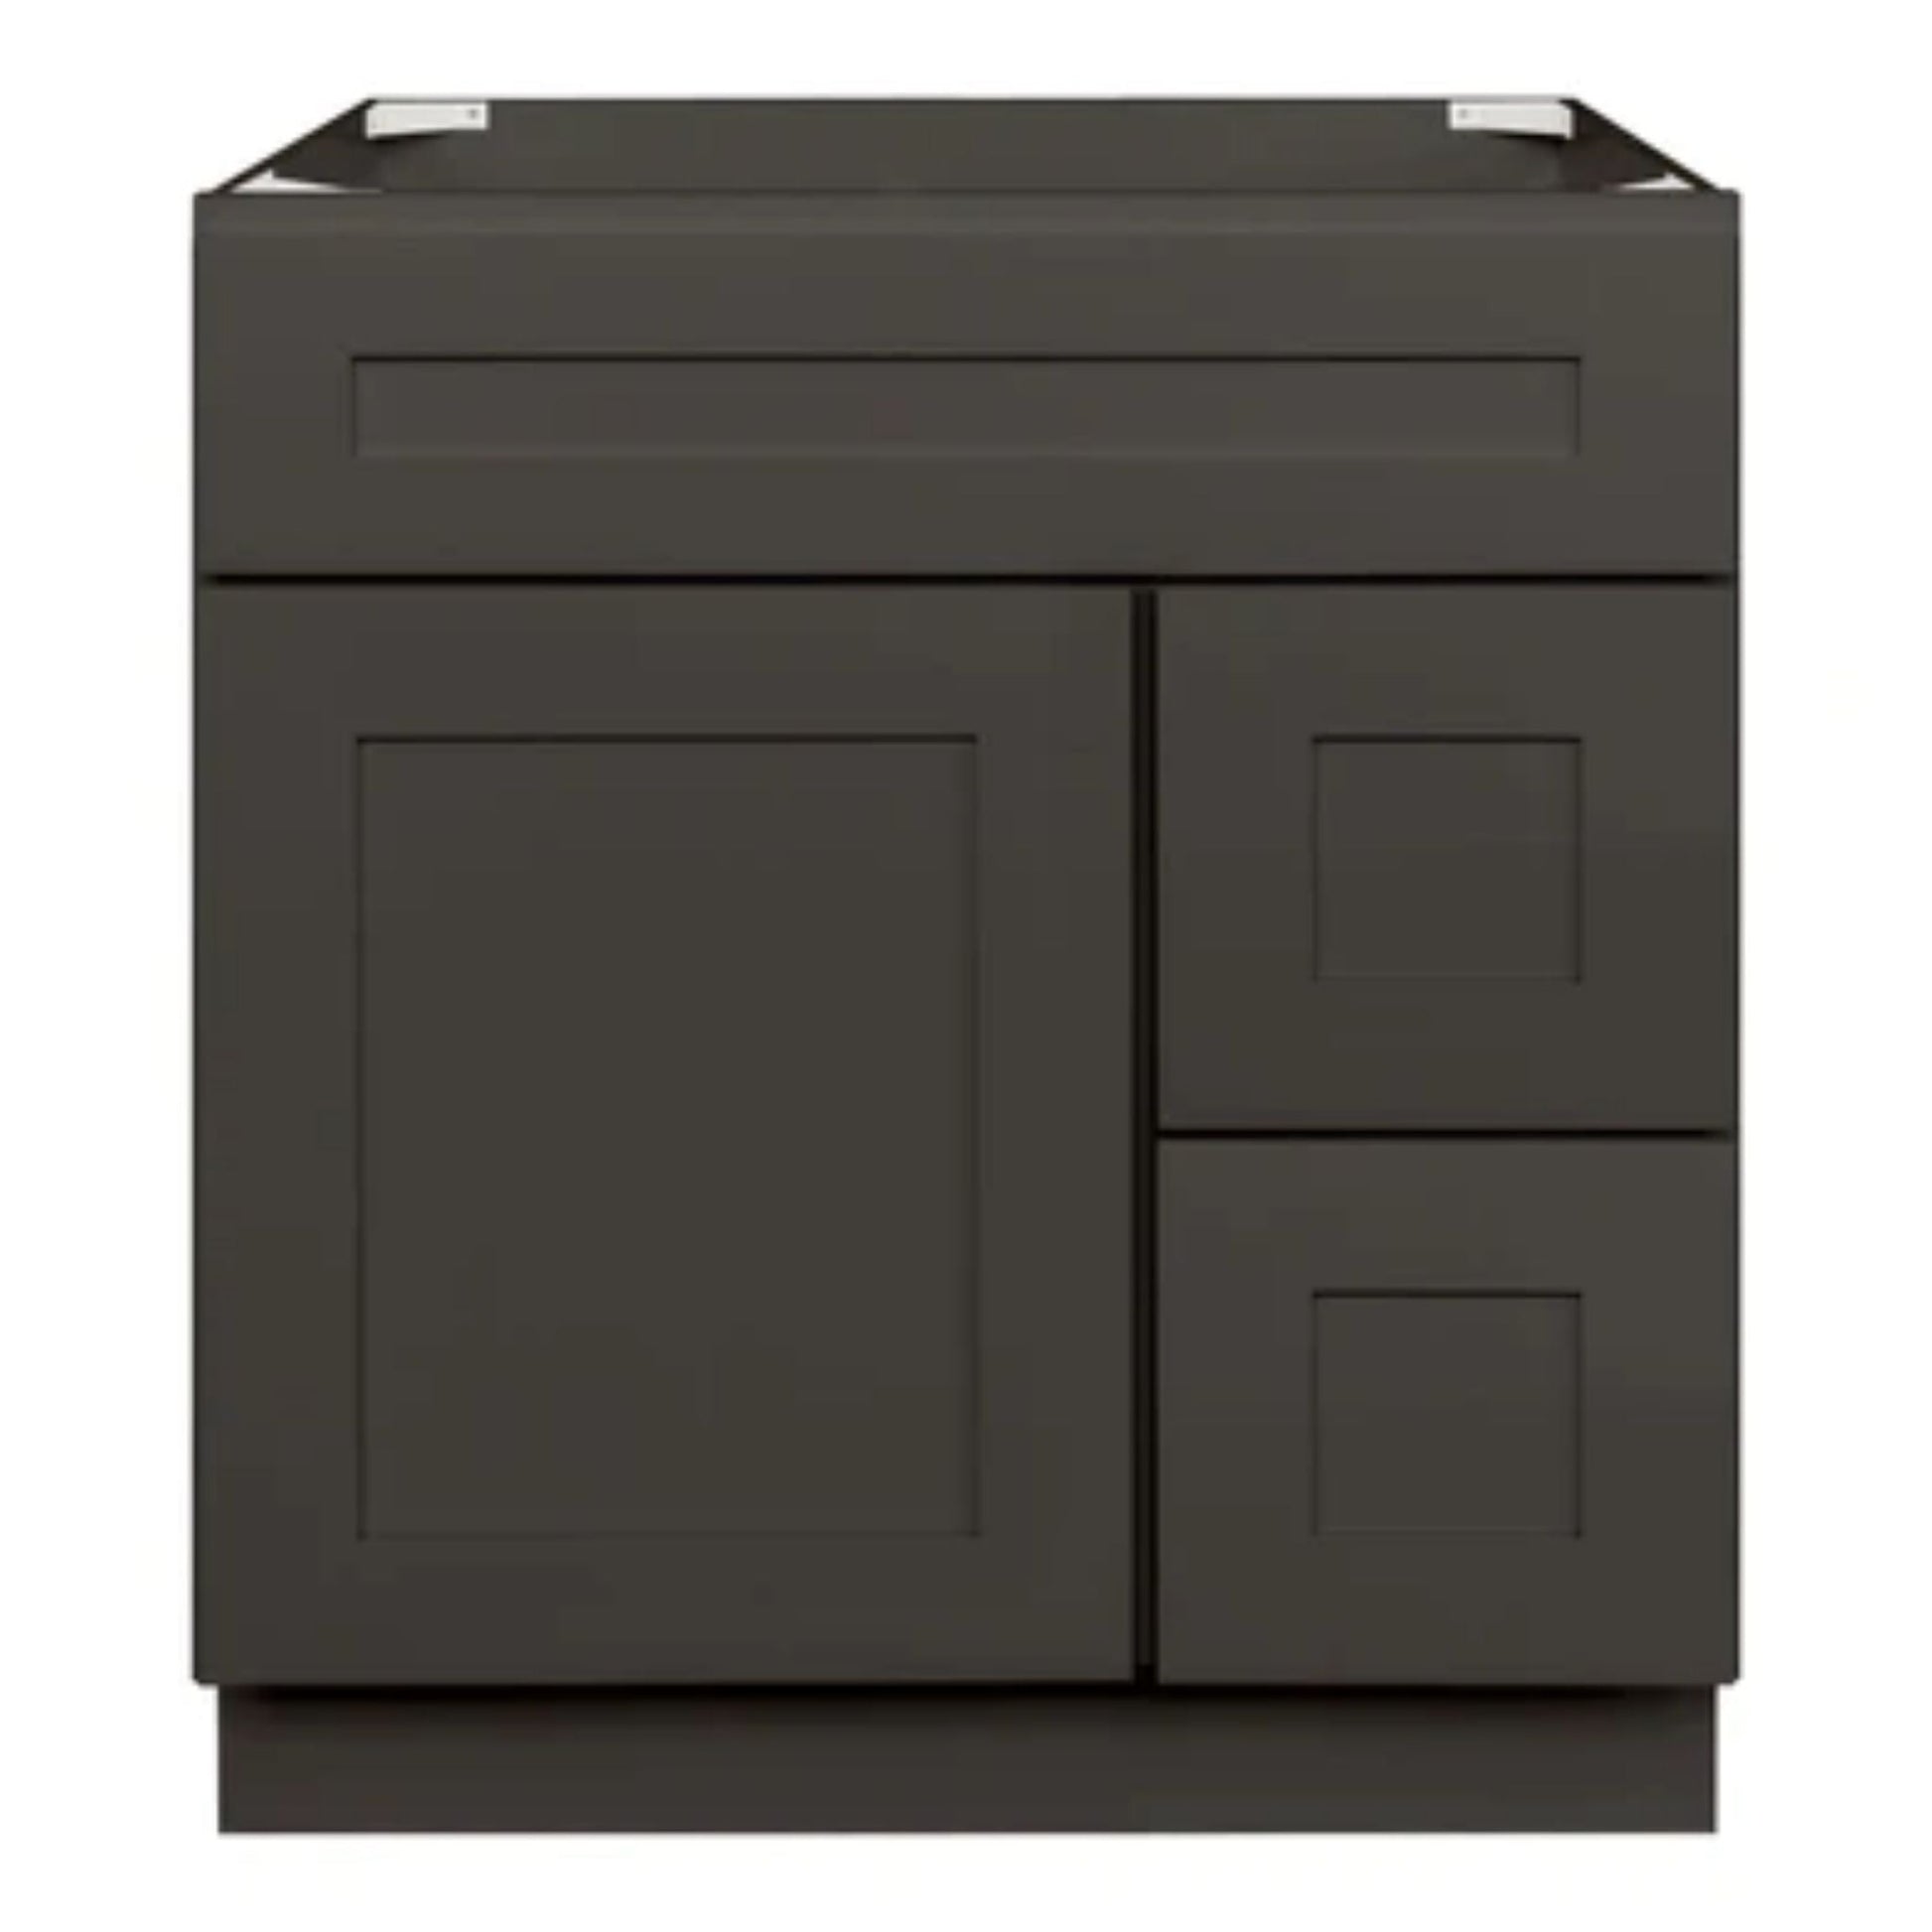 LessCare 30" x 21" x 34 1/2" Avalon Charcoal Vanity Sink Base Cabinet with Right Drawers